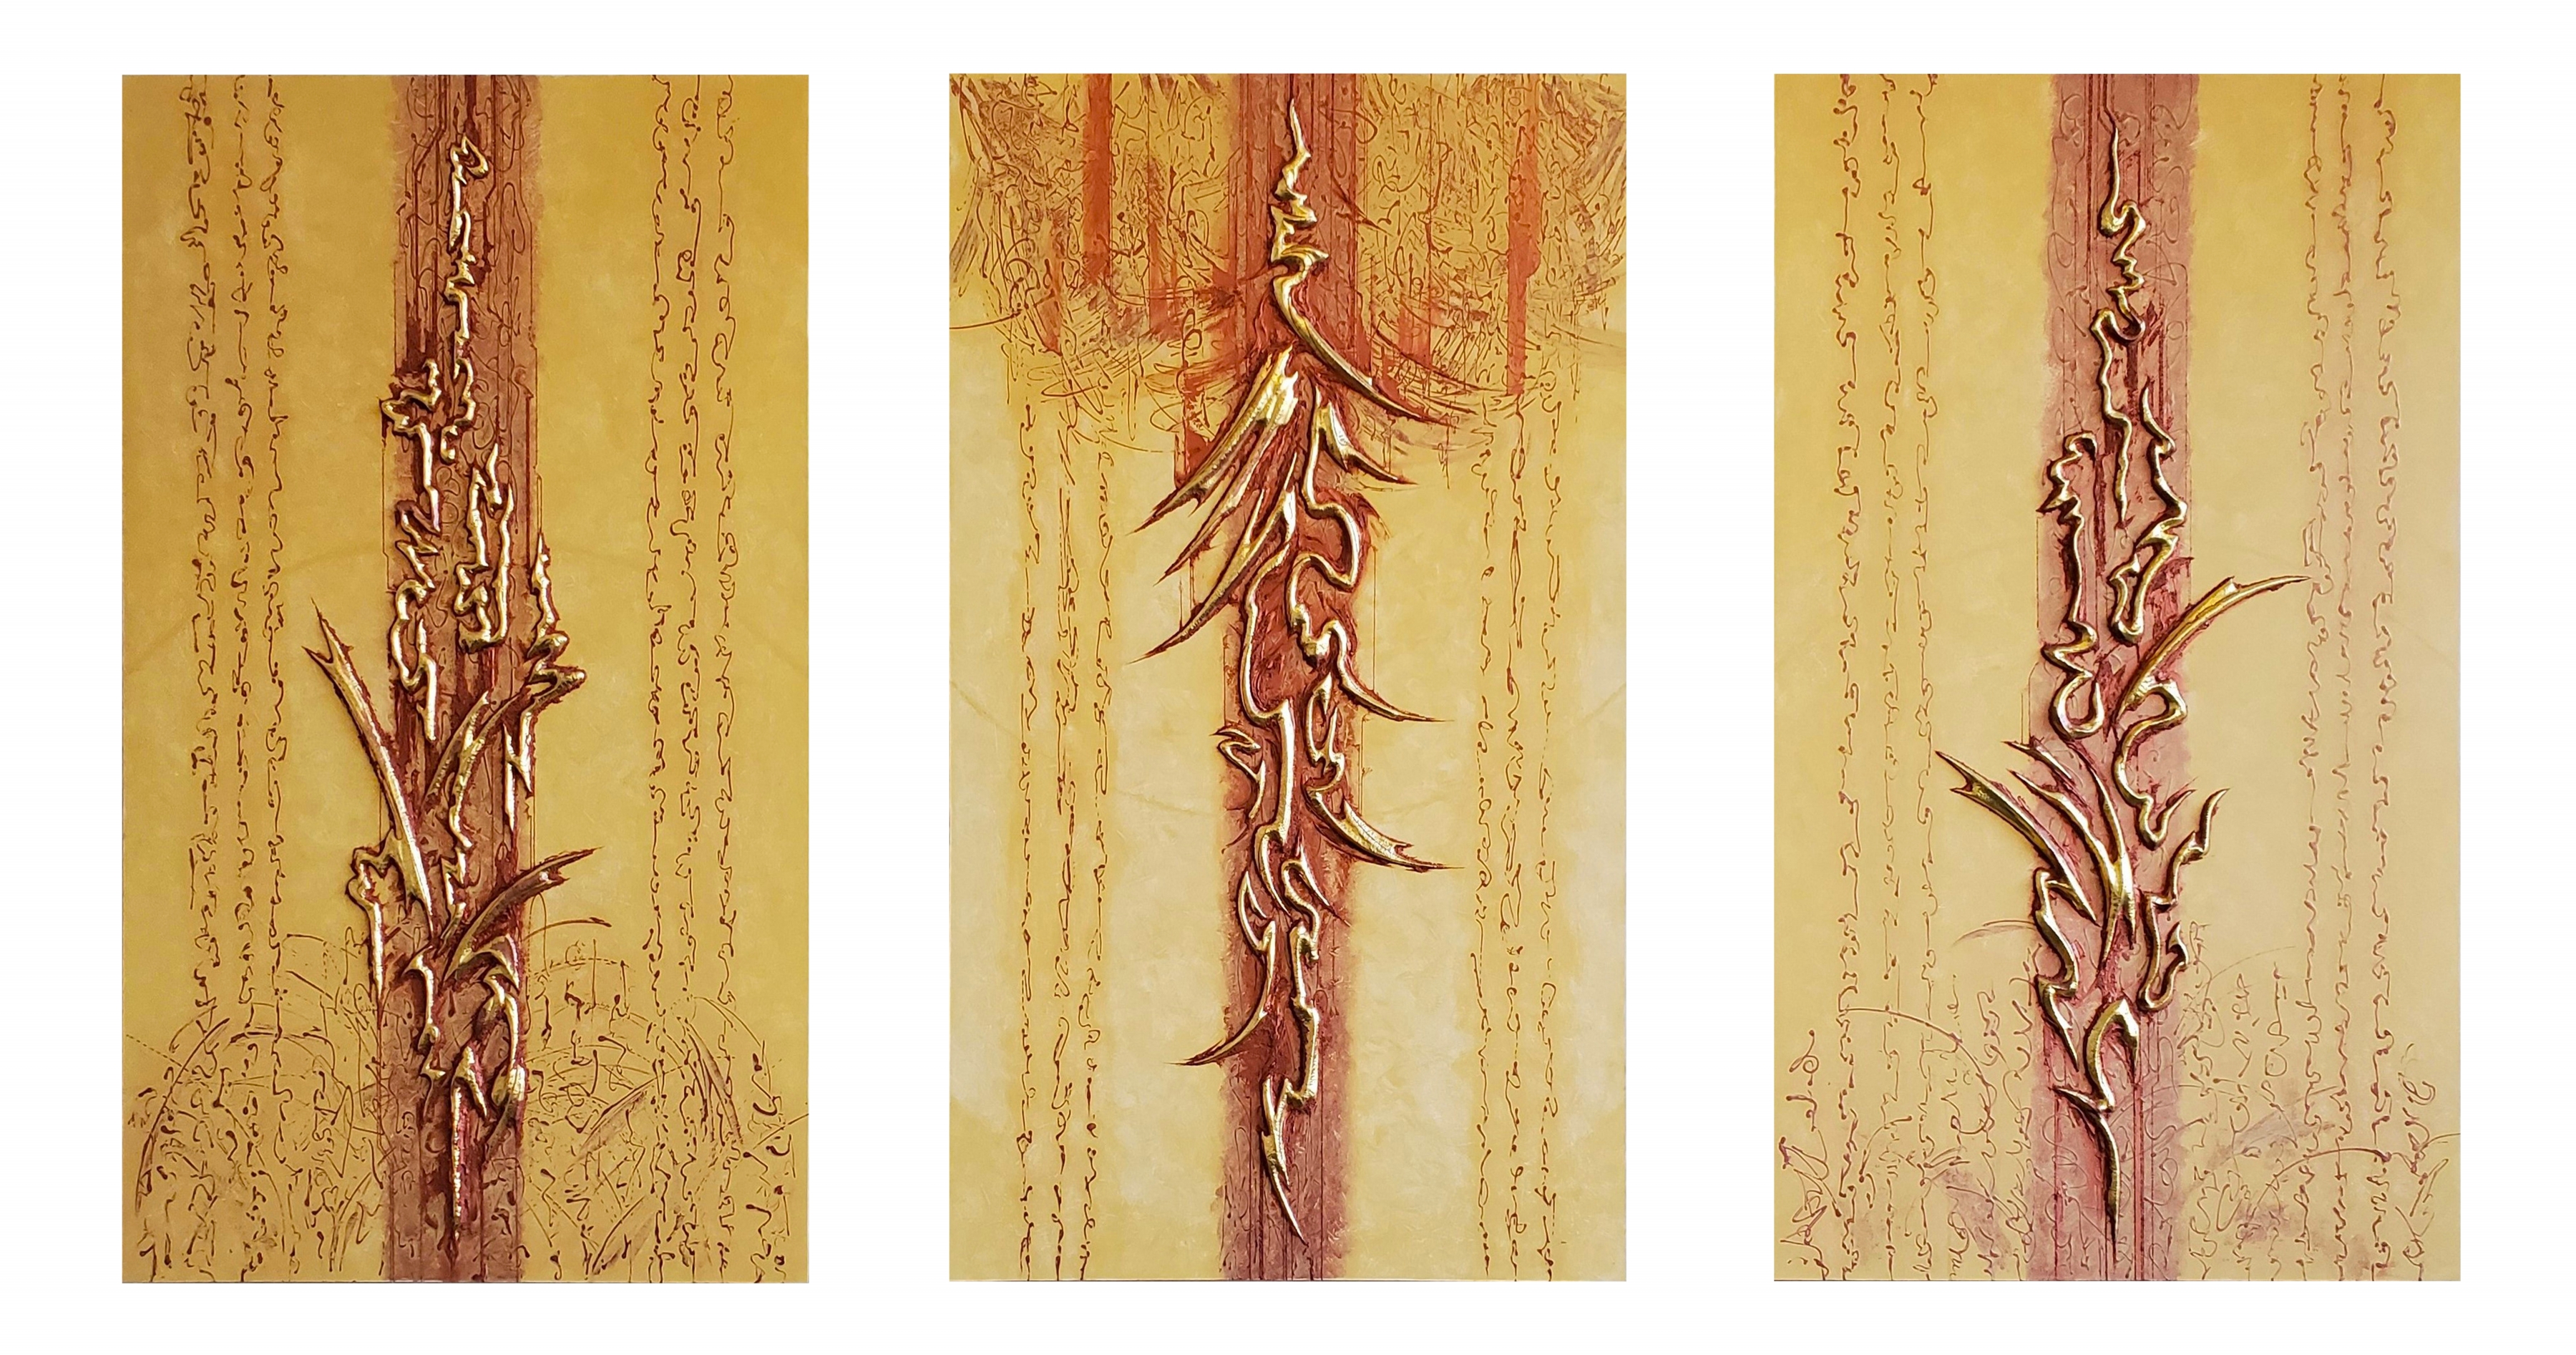 Cantos Helios (Triptych), 60&quot; x 34&quot; (Each), Gilded Copper Repousse Elements, Abraded Acrylic And Mineral Particles On Archival, Cradled Wood Panels